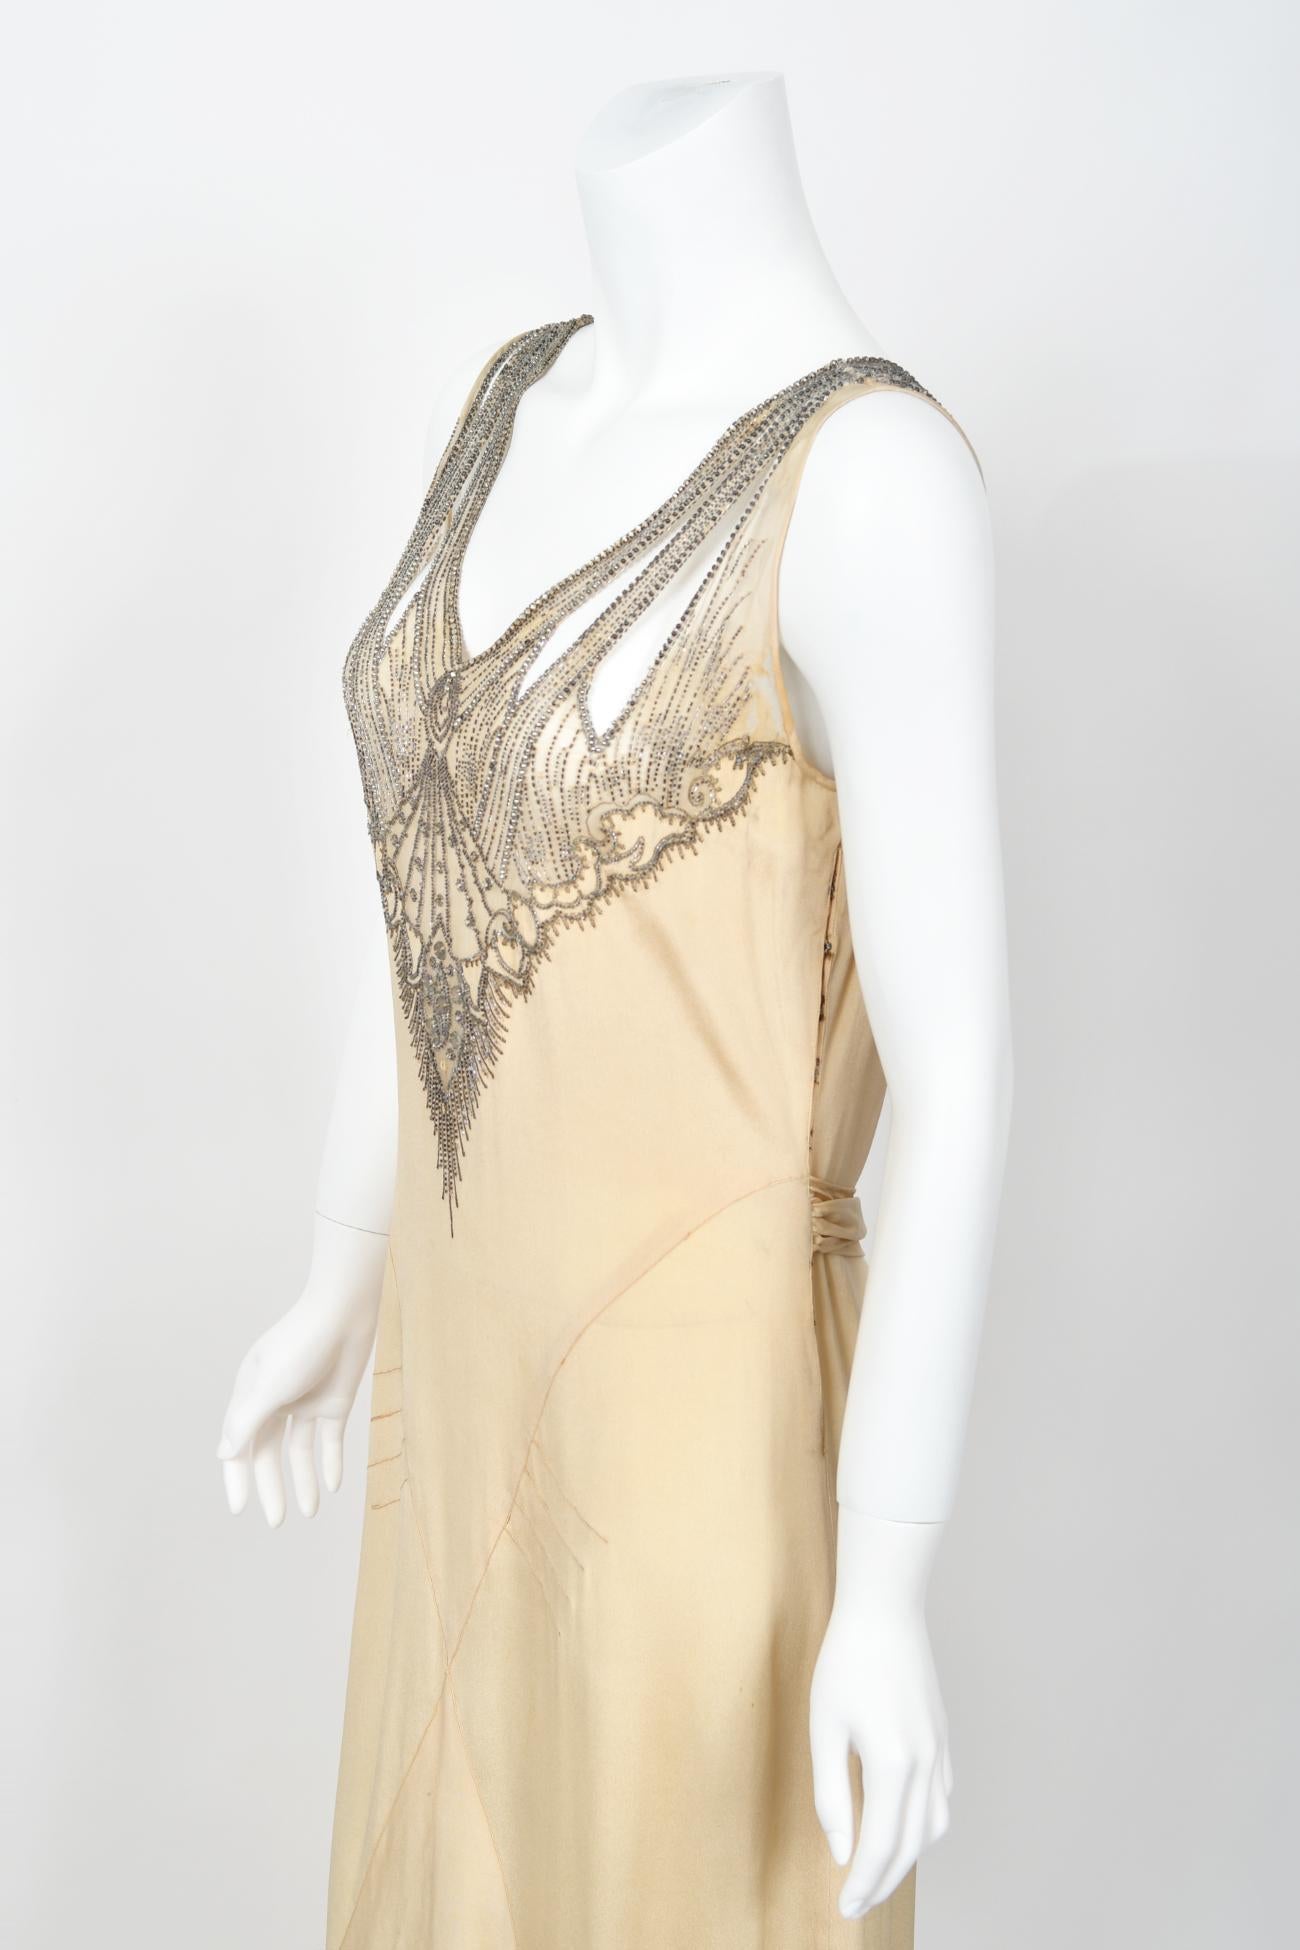 1930's French Ivory Creme Silk Beaded Sheer Illusion Deco Bias-Cut Bridal Gown   For Sale 6